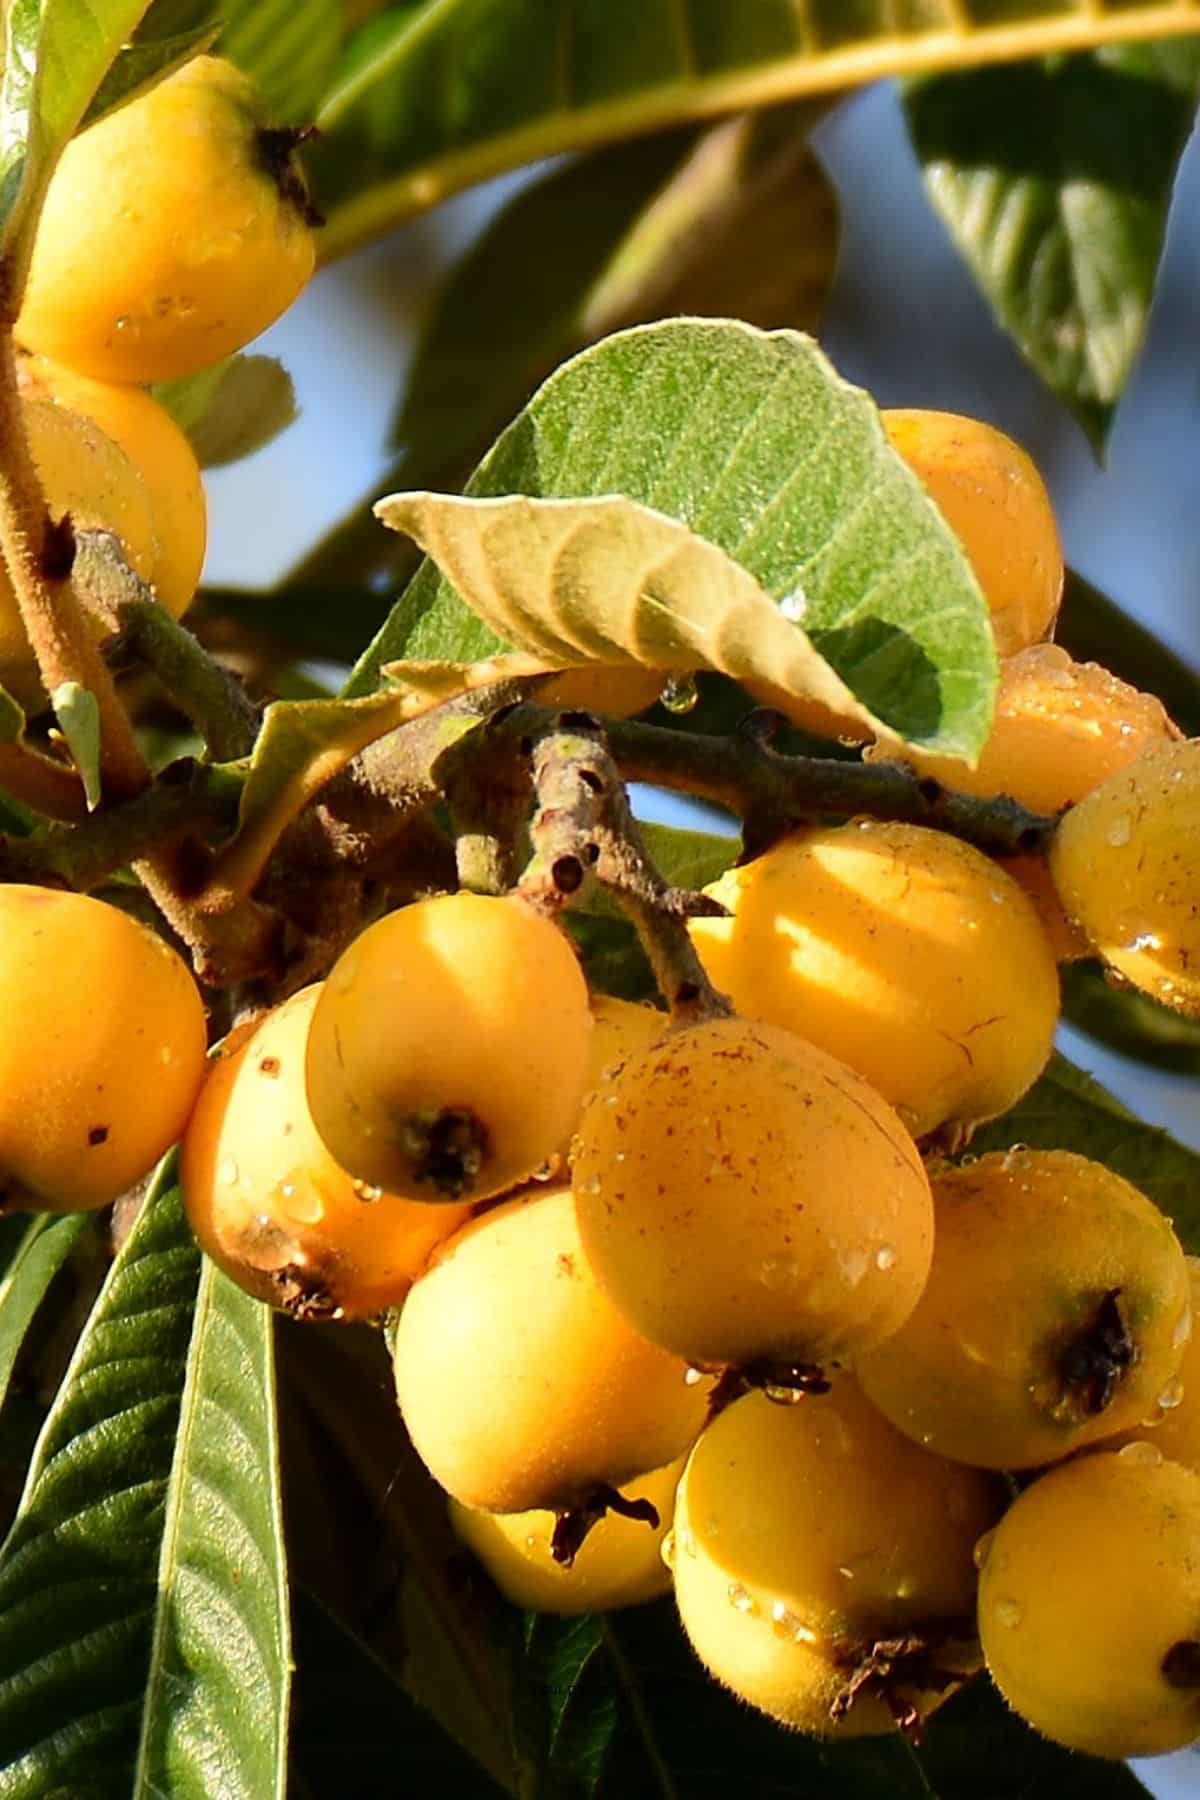 Loquat fruit on a tree with leaves.